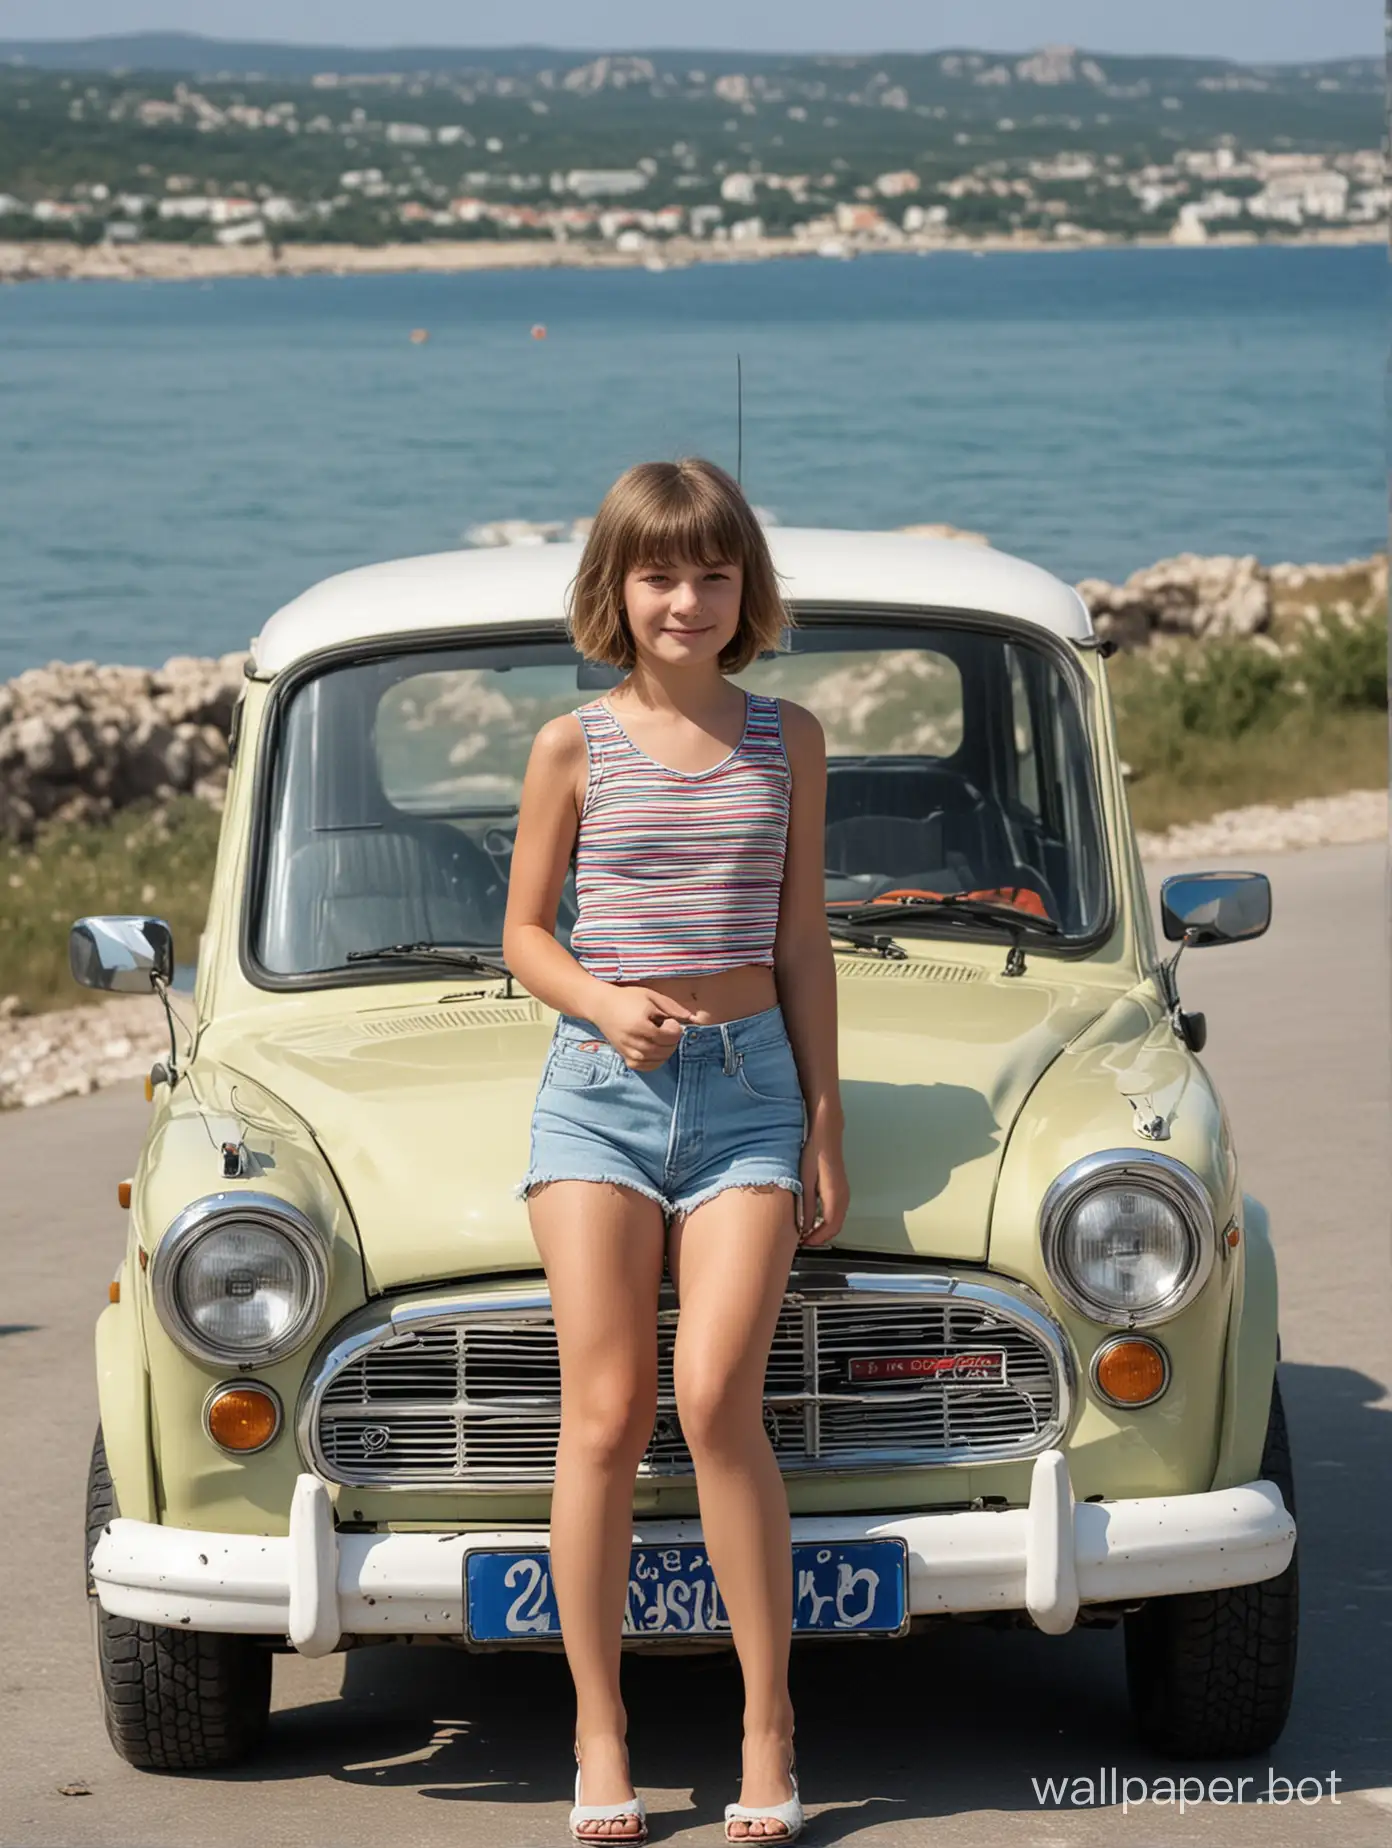 Hippie-Vibes-11YearOld-Girl-with-Bob-Haircut-by-the-Sea-in-Crimea